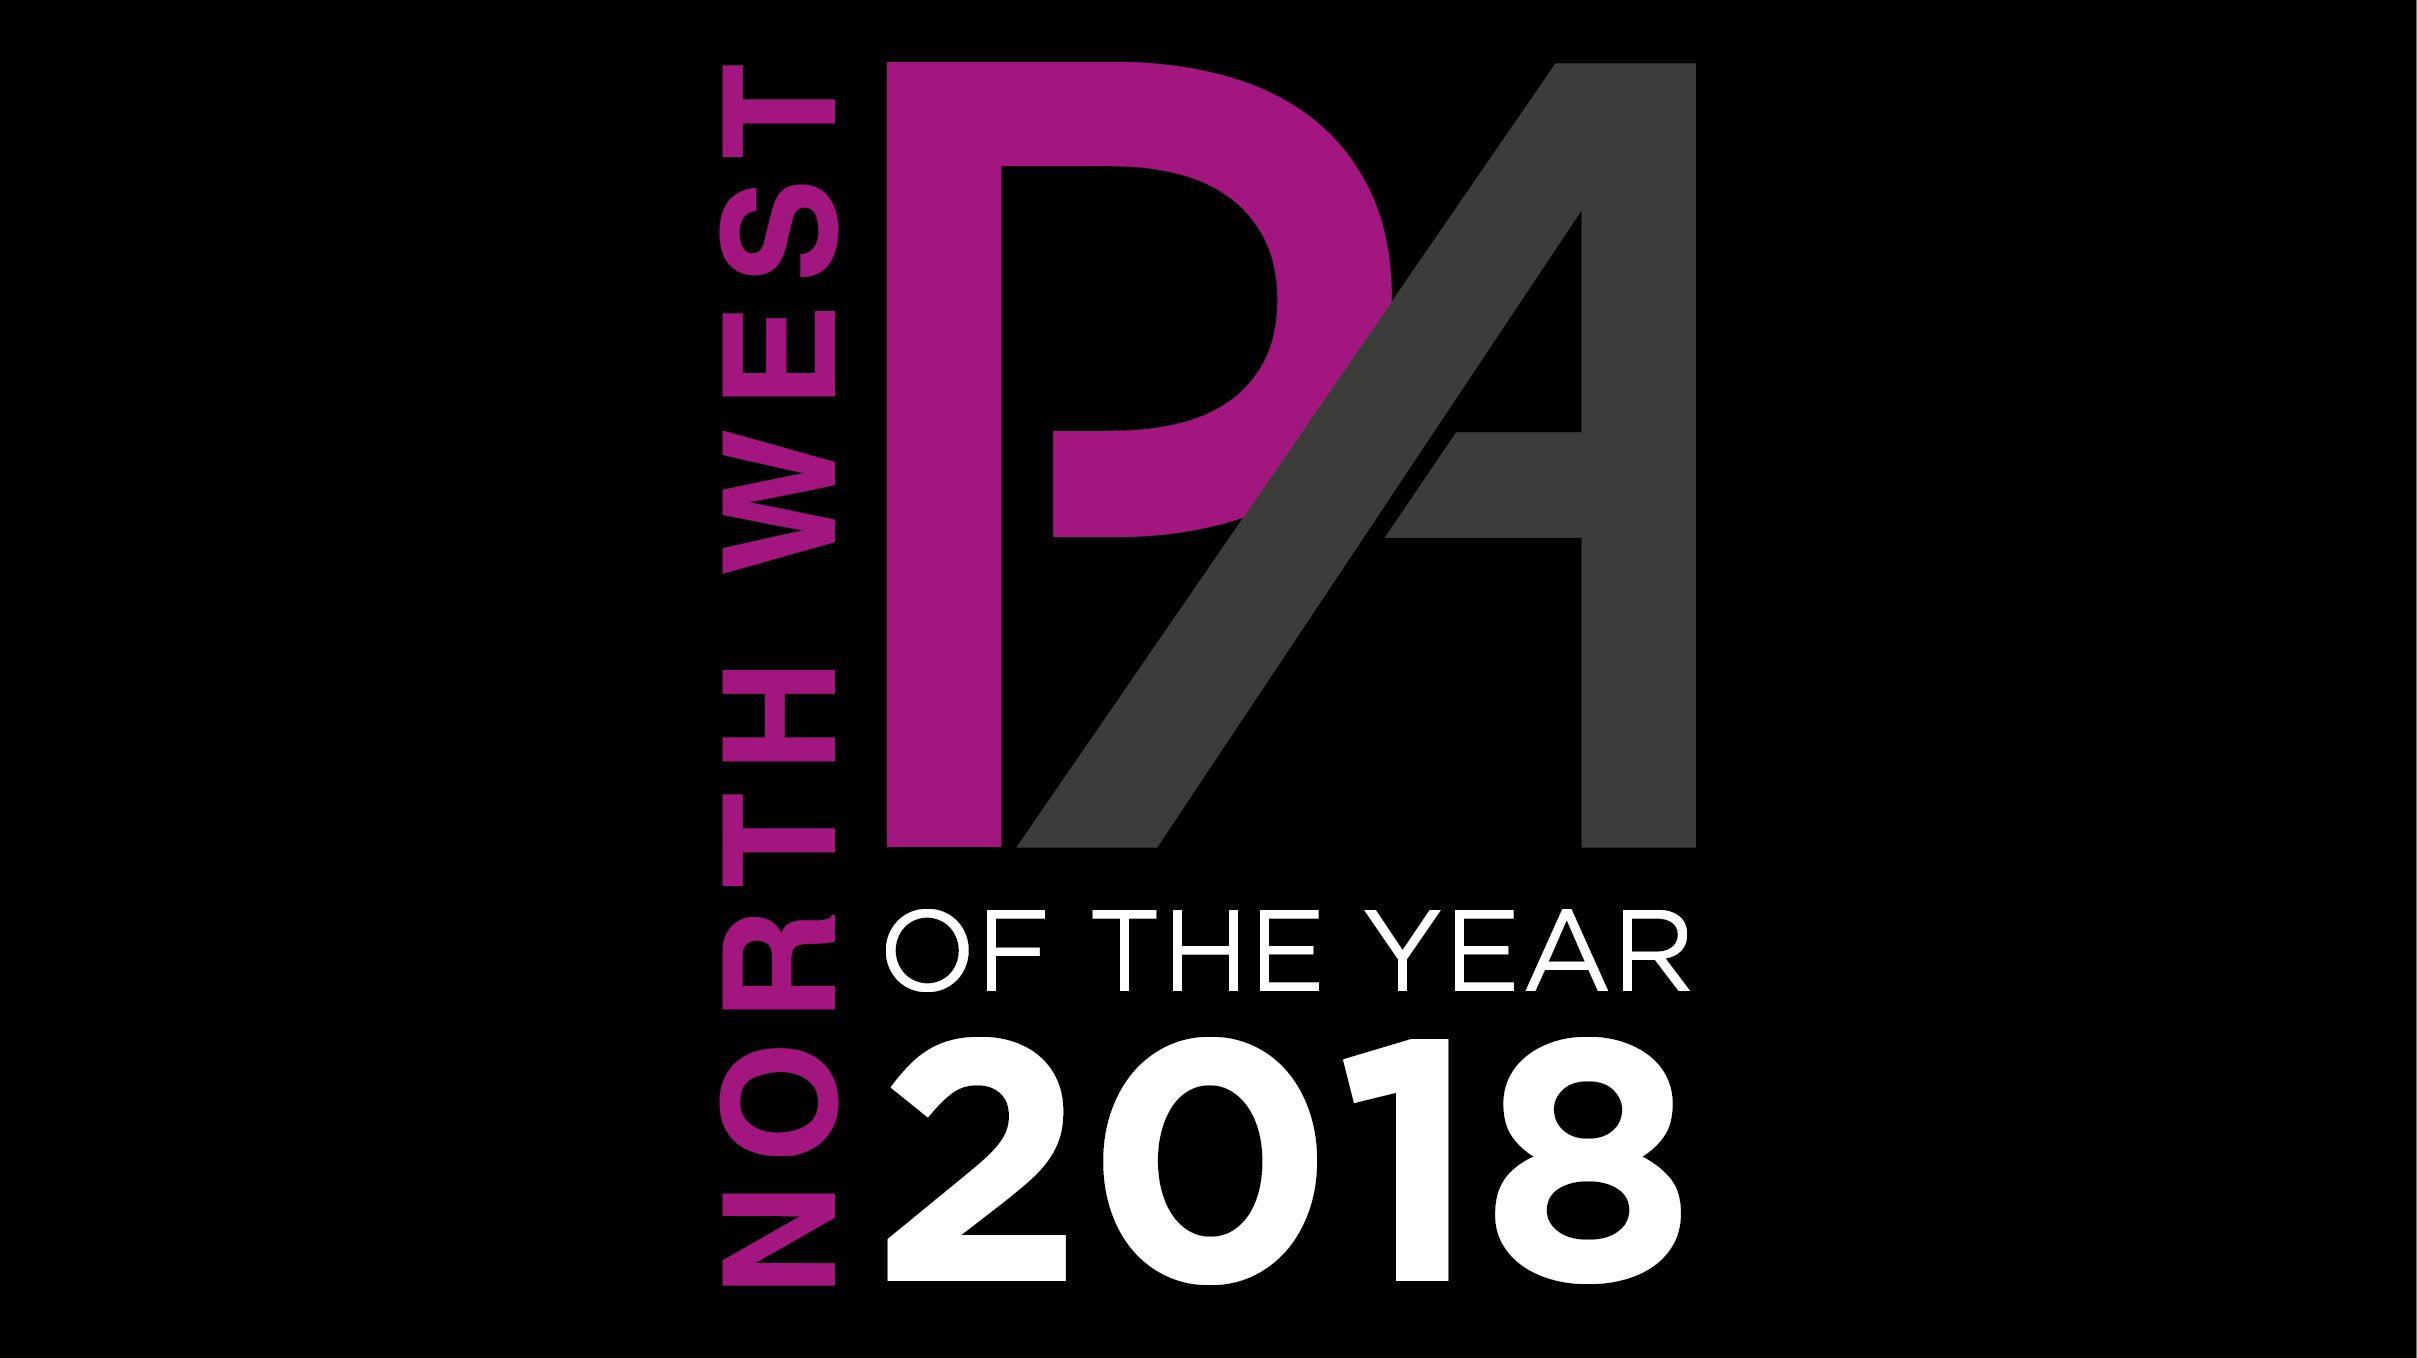 Year 2018 Logo - North West PA of the Year Awards